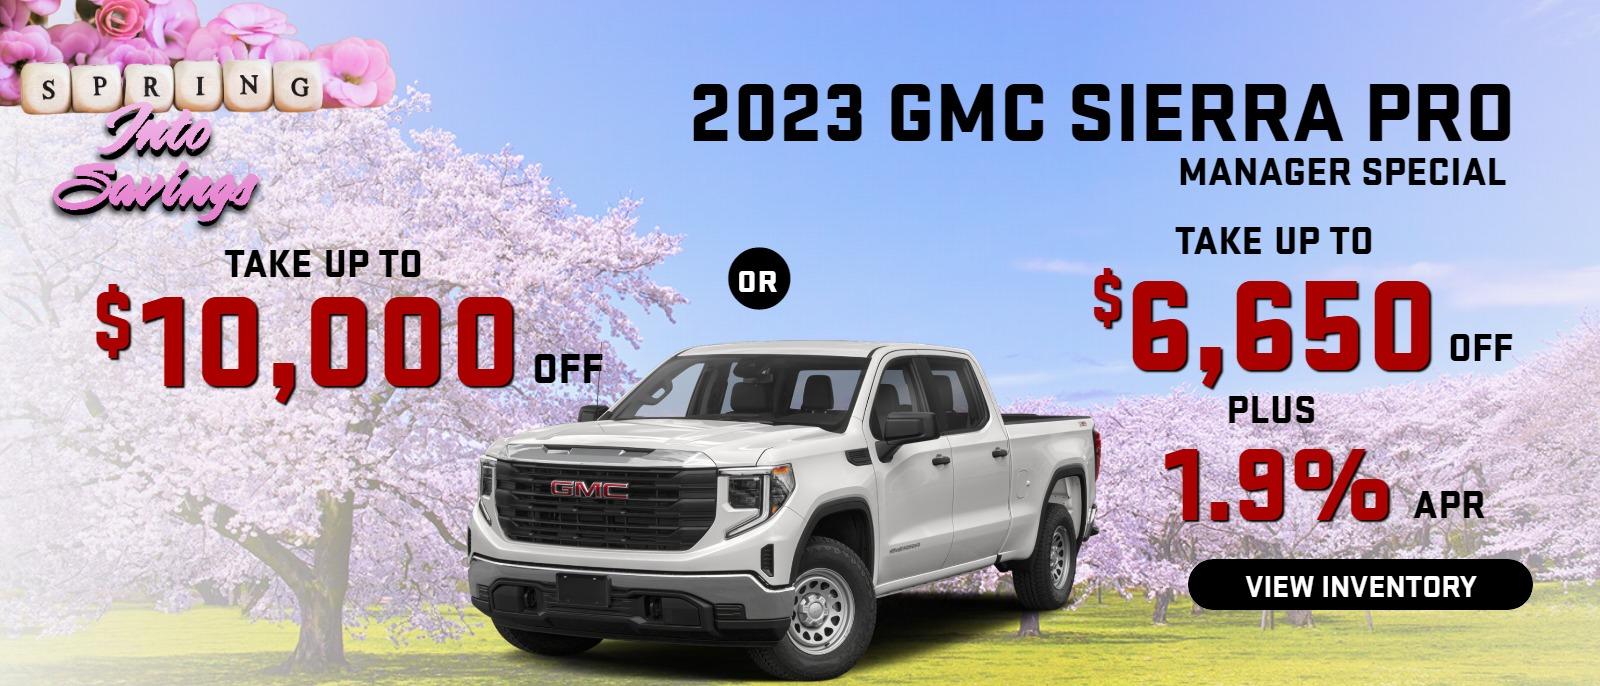 2023 Sierra PRO MANAGER SPECIAL
Stock G8974
take up to $10,000.00 OFF
OR
take up to $6650 OFF
PLUS
1.9% finance